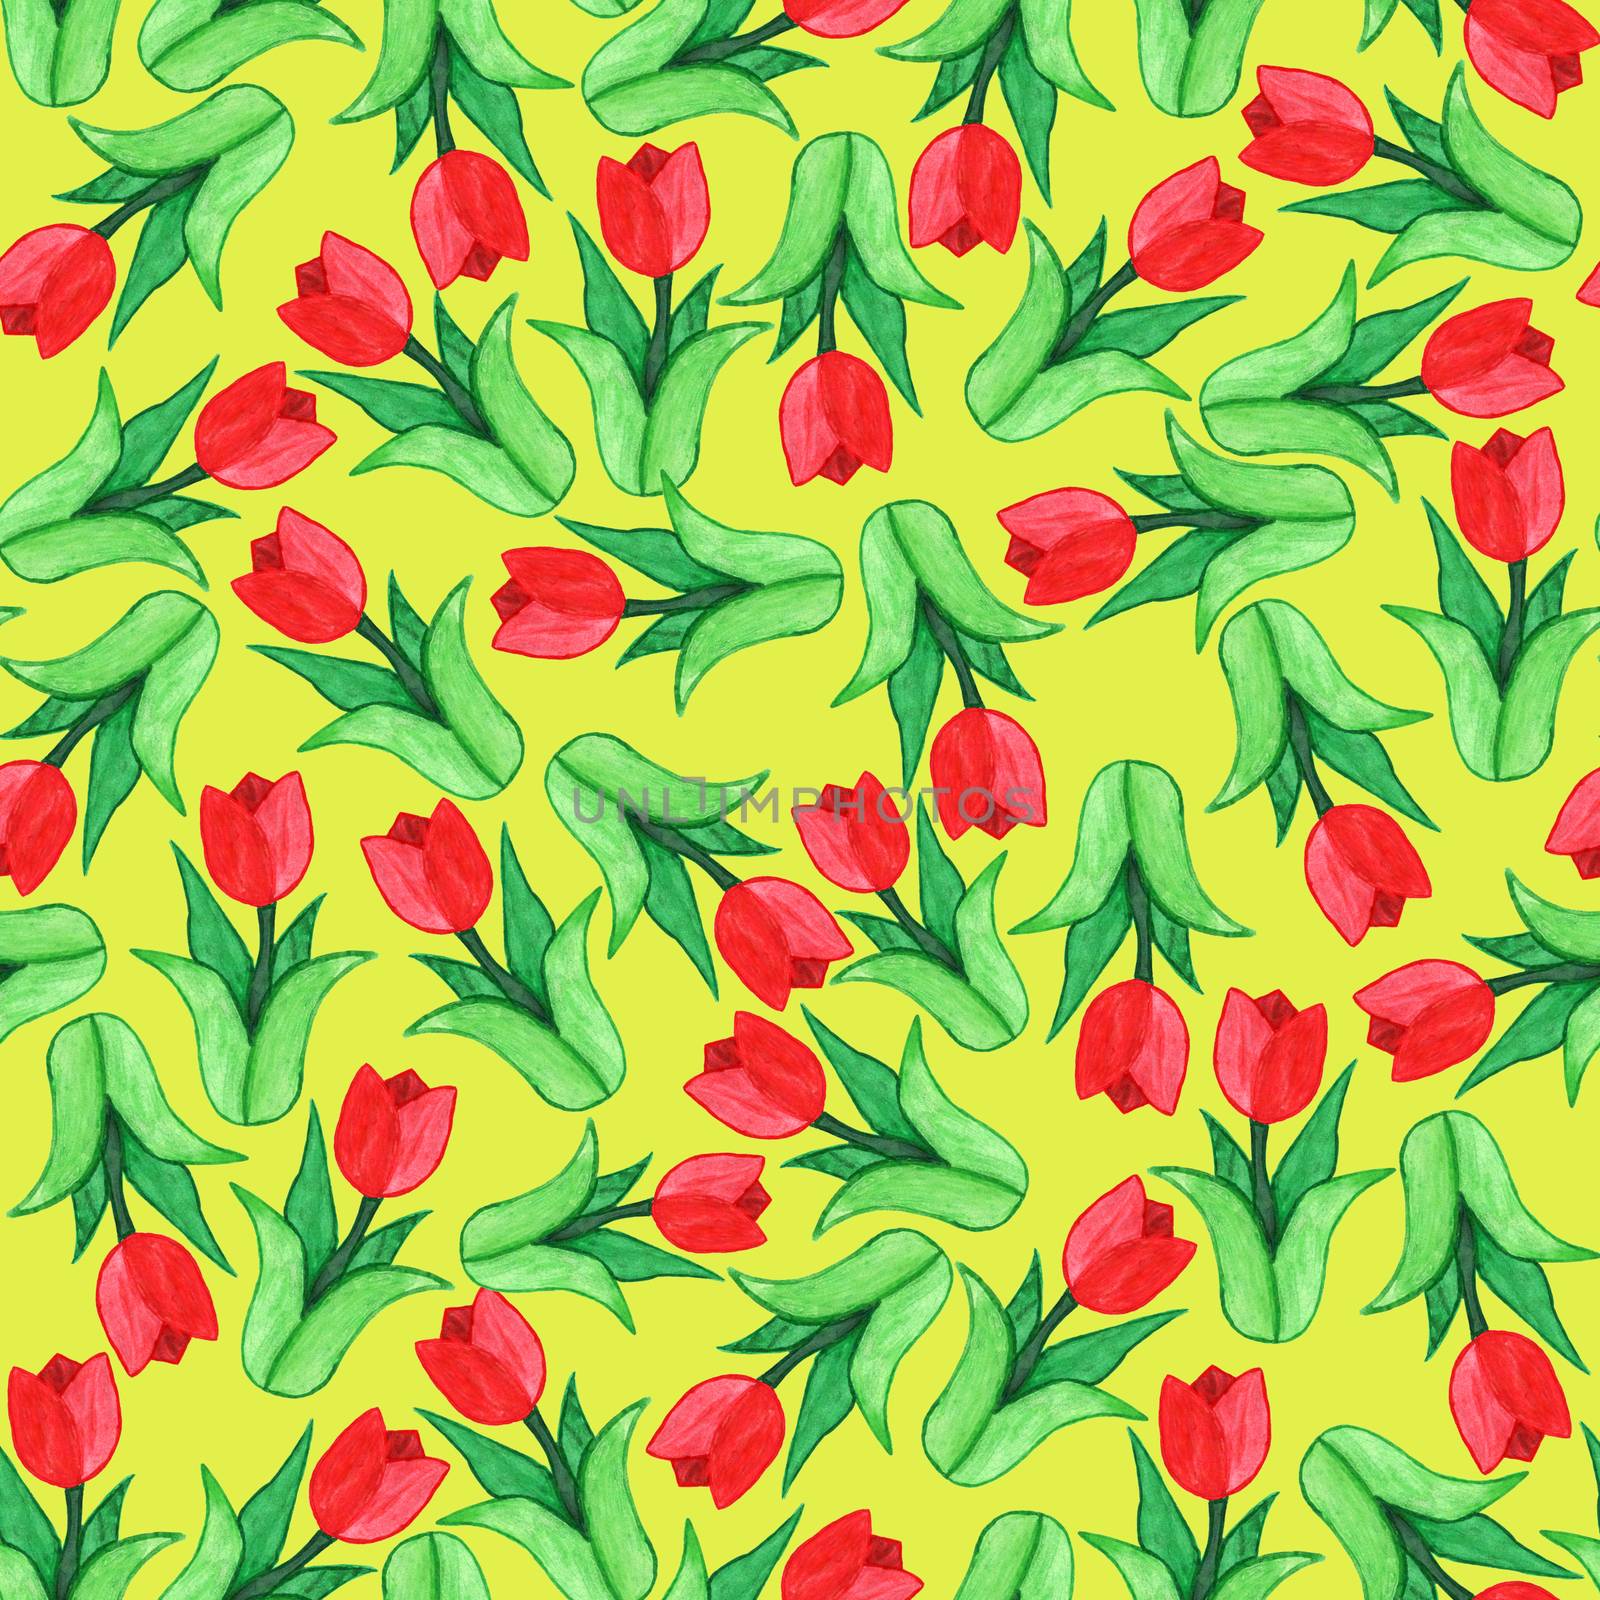 Seamless floral pattern with tulips, watercolor paint by Grommik